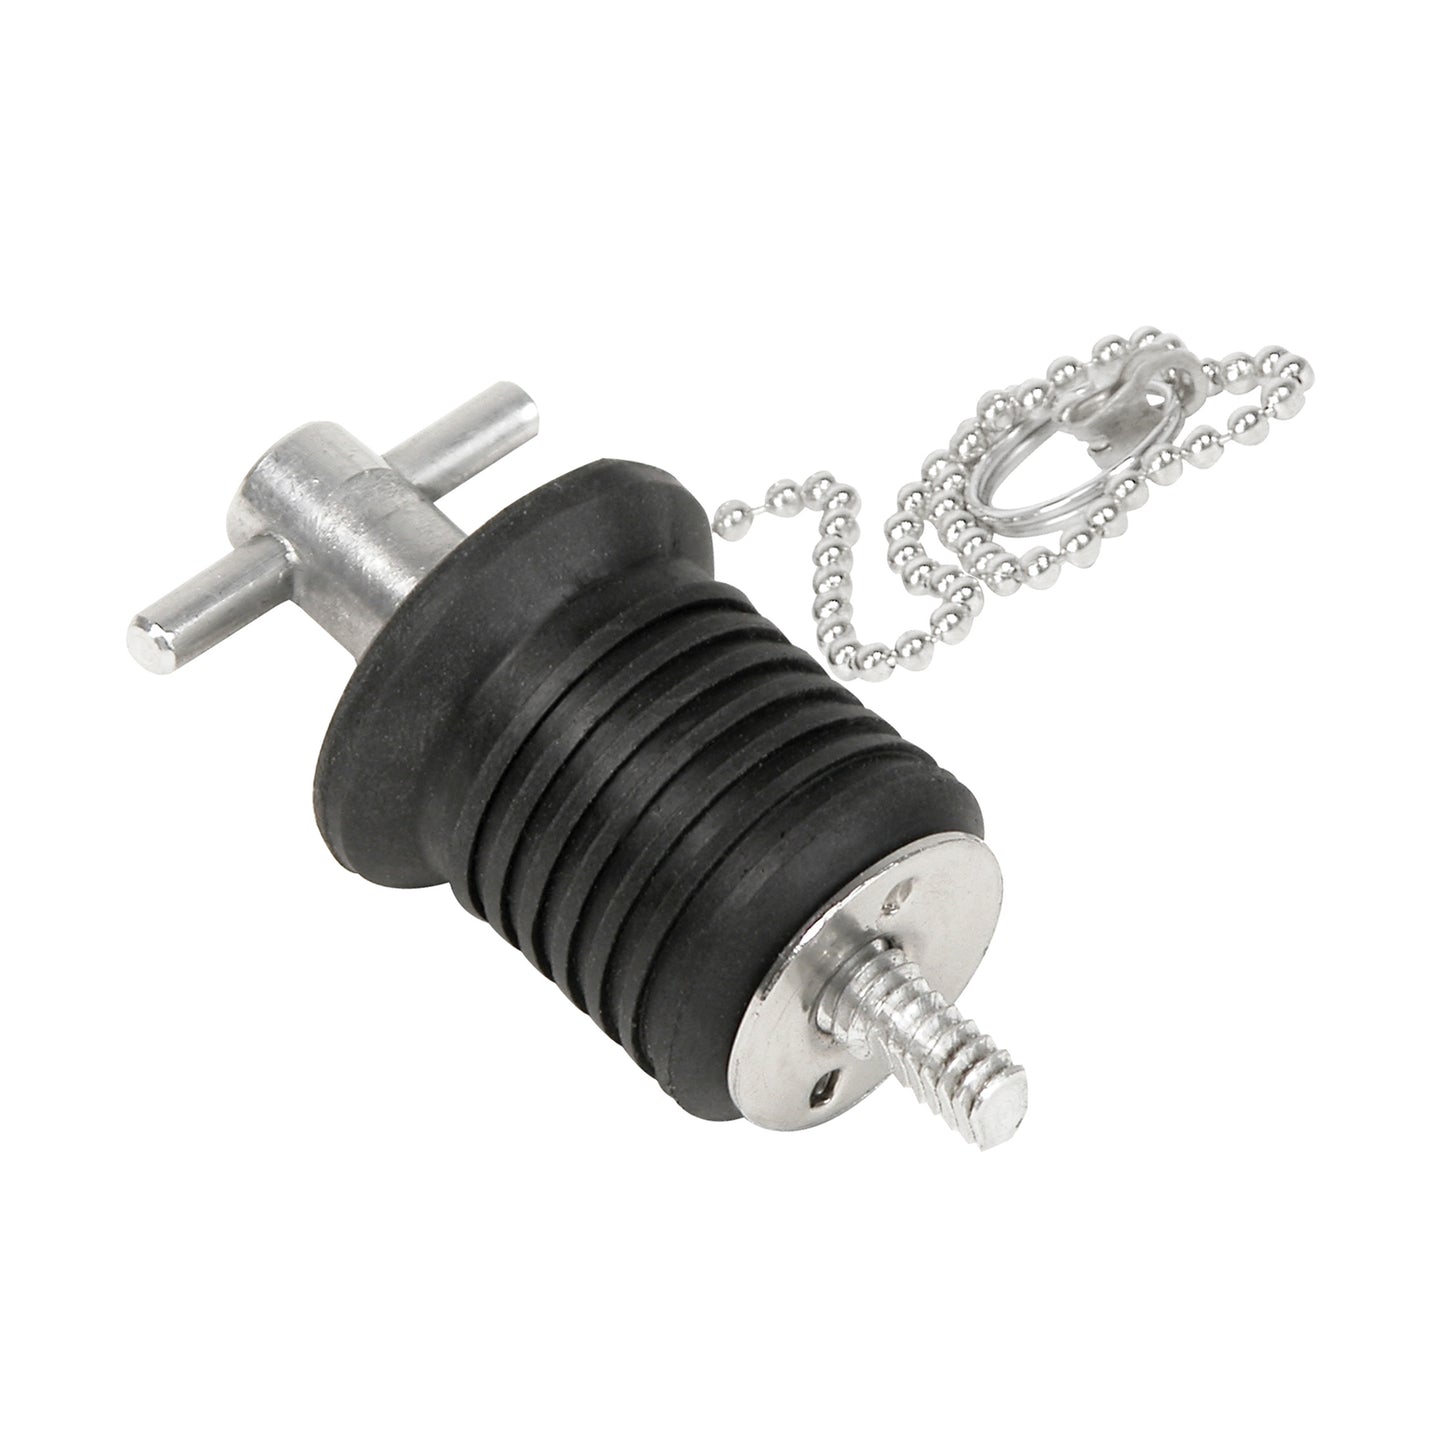 Aluminum w/Stainless Steel Turn/Twist Type Bailer Plug with 8" Chain